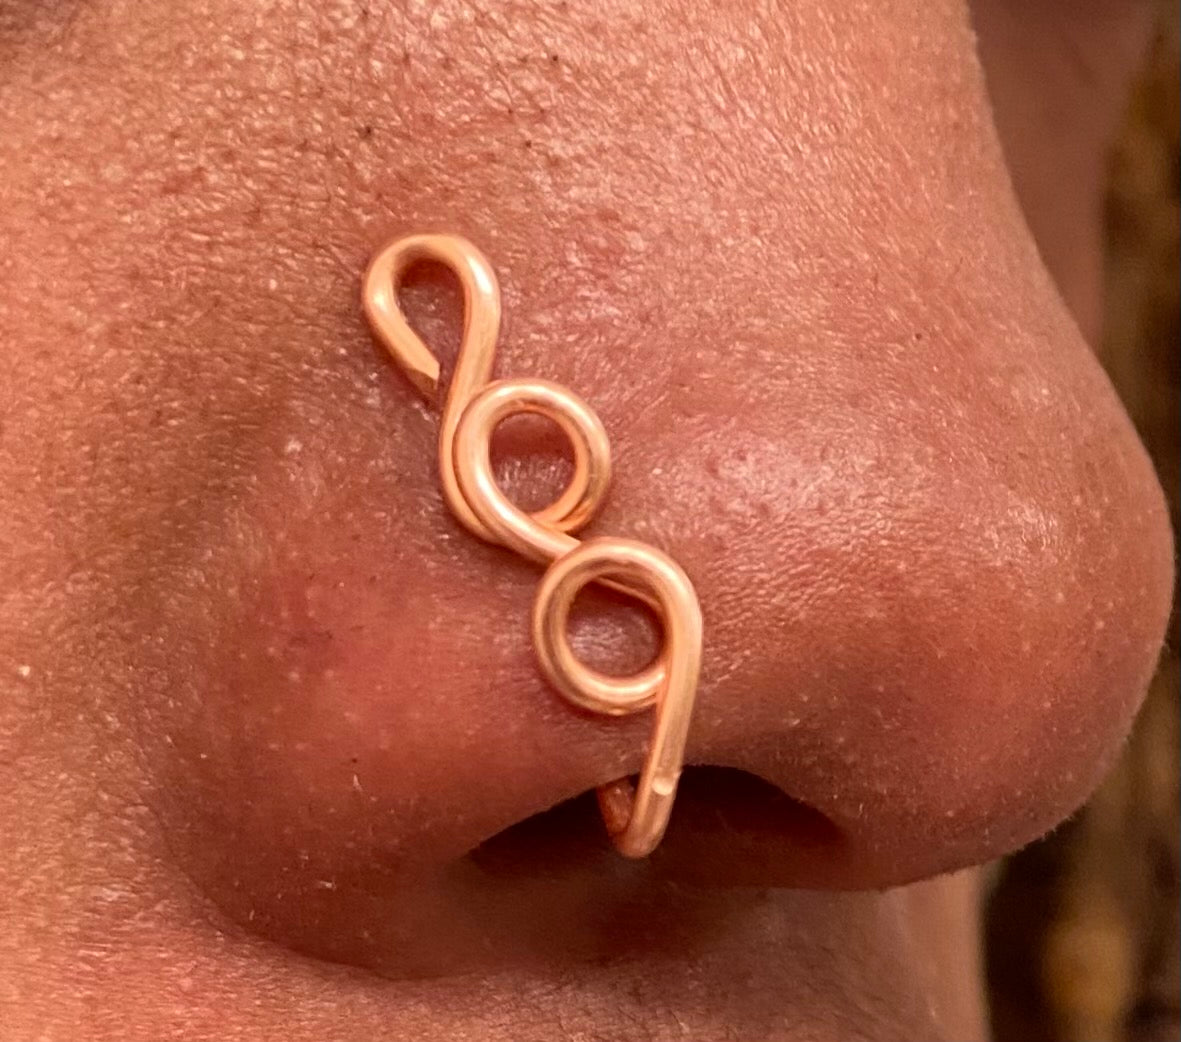 3 nose lace for $25